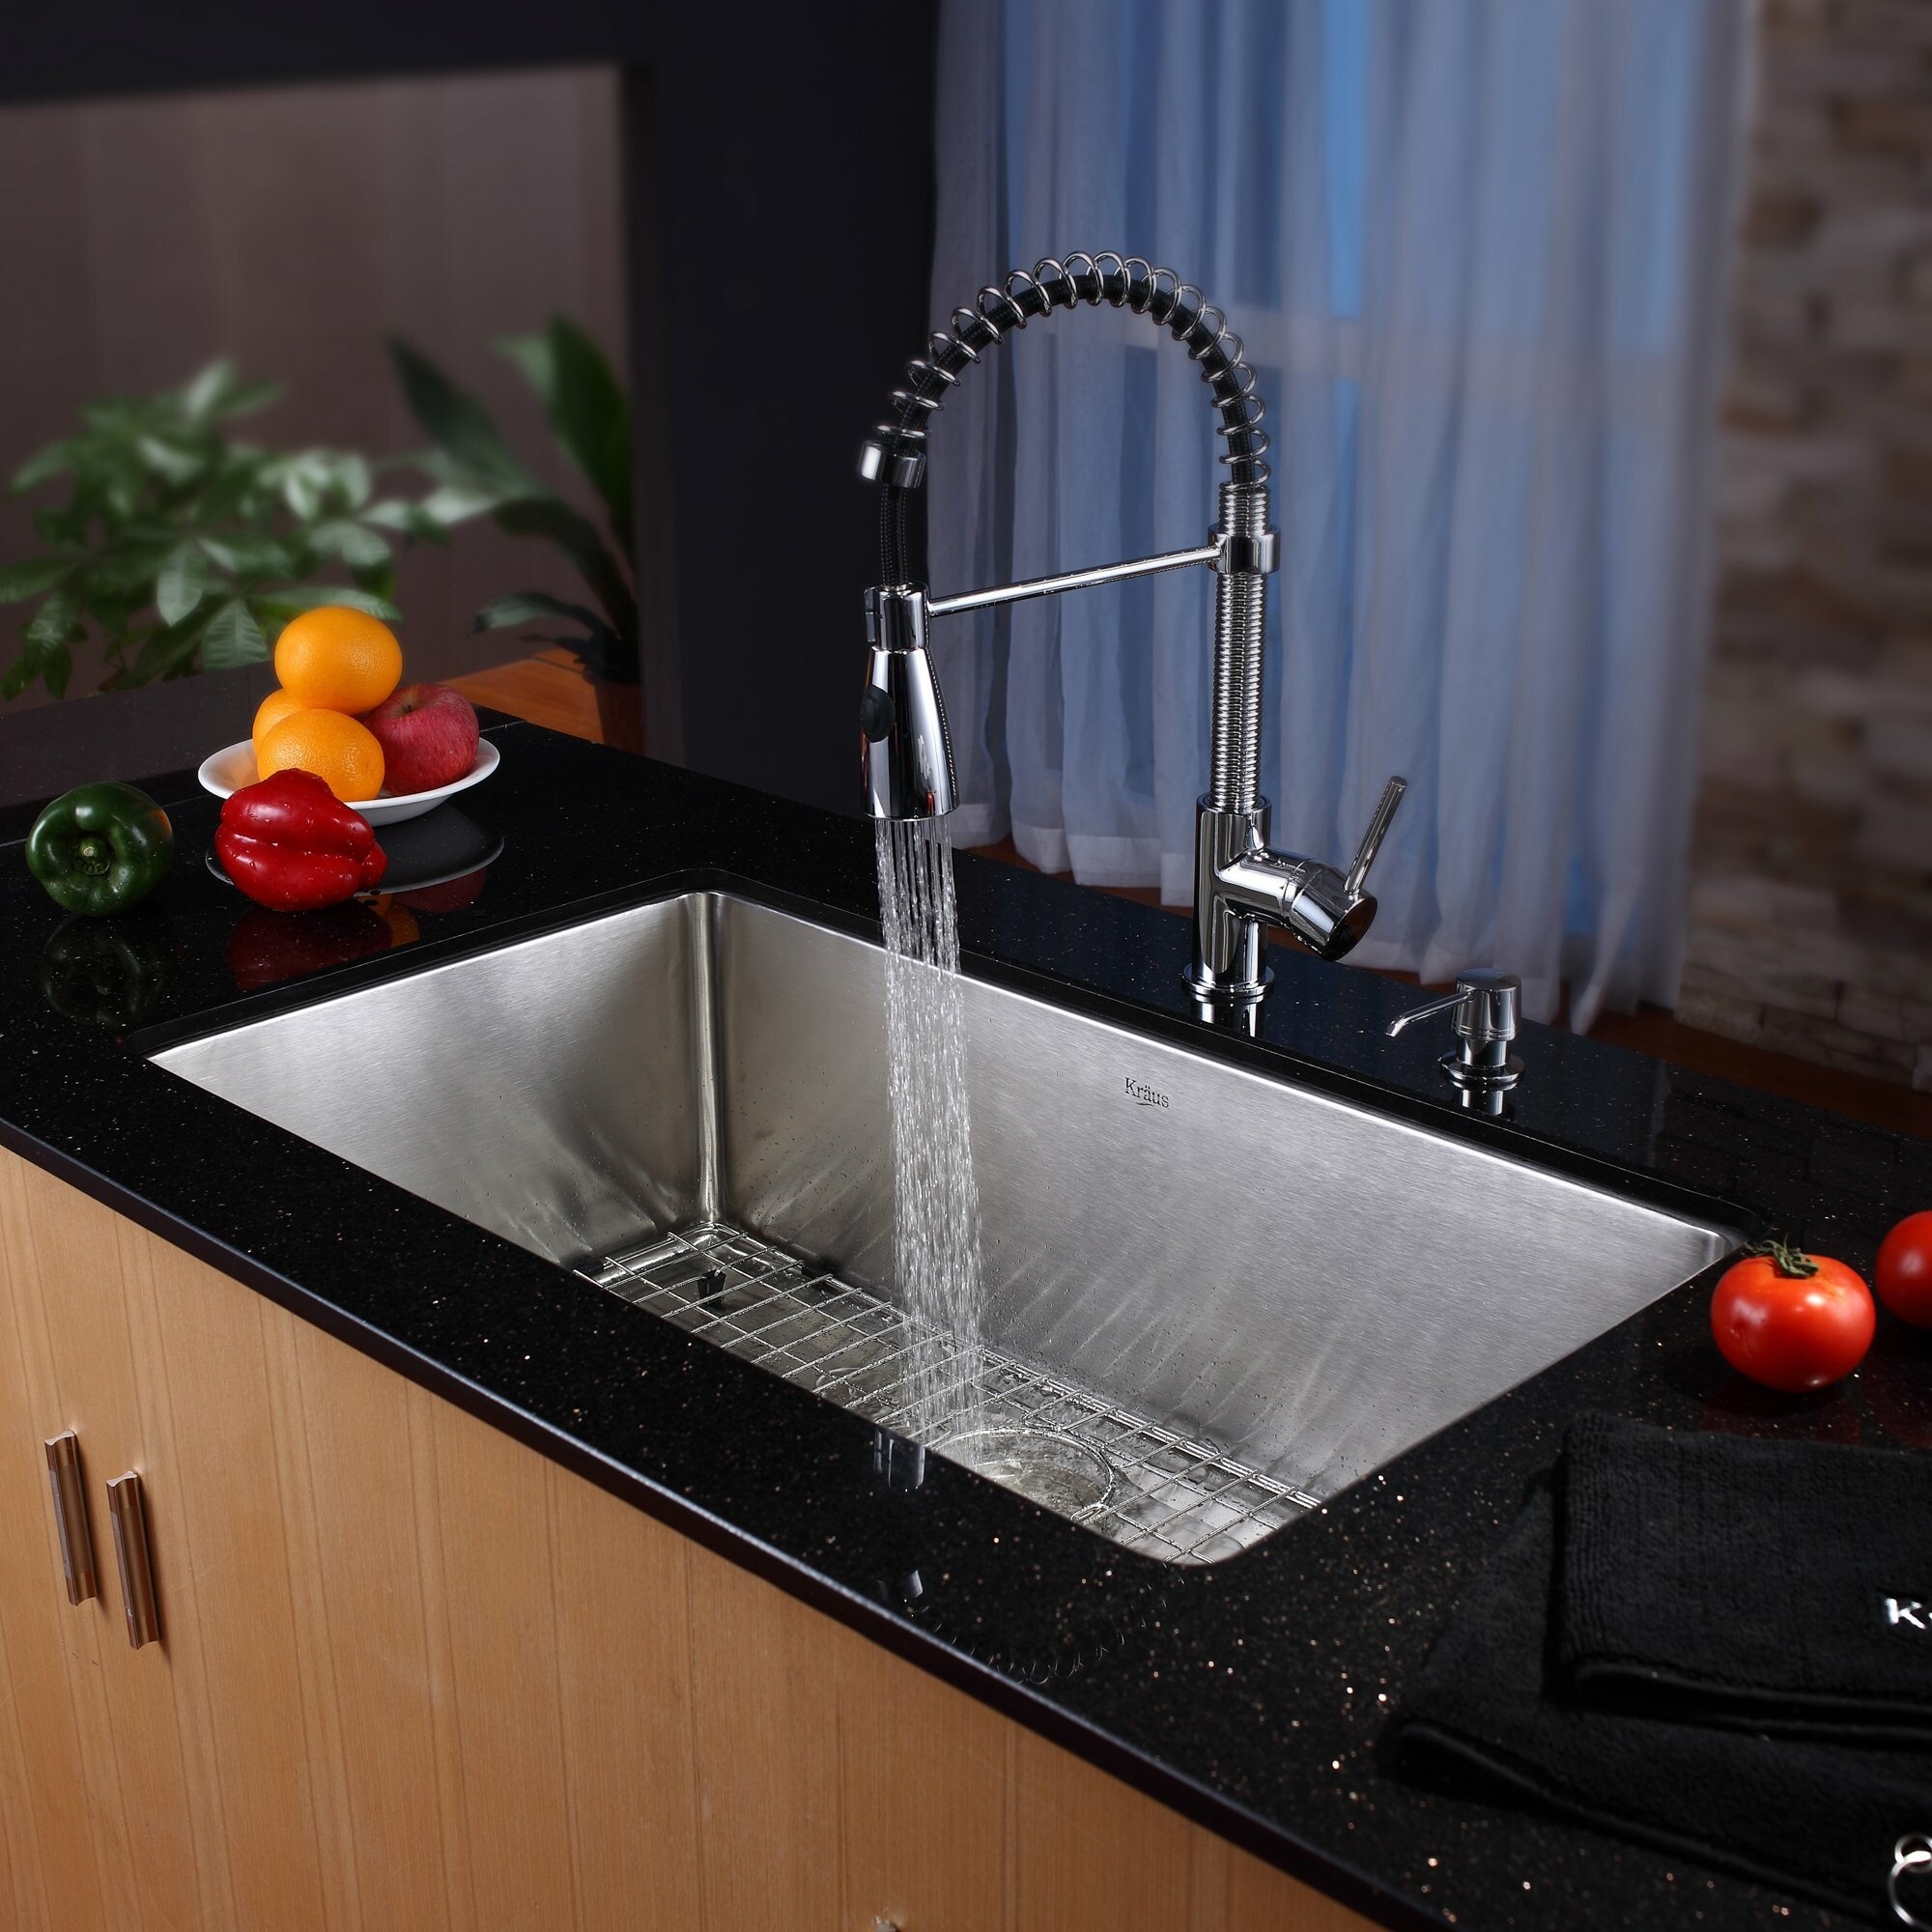 32" x 19" Undermount Kitchen Sink with Faucet and Soap Dispenser